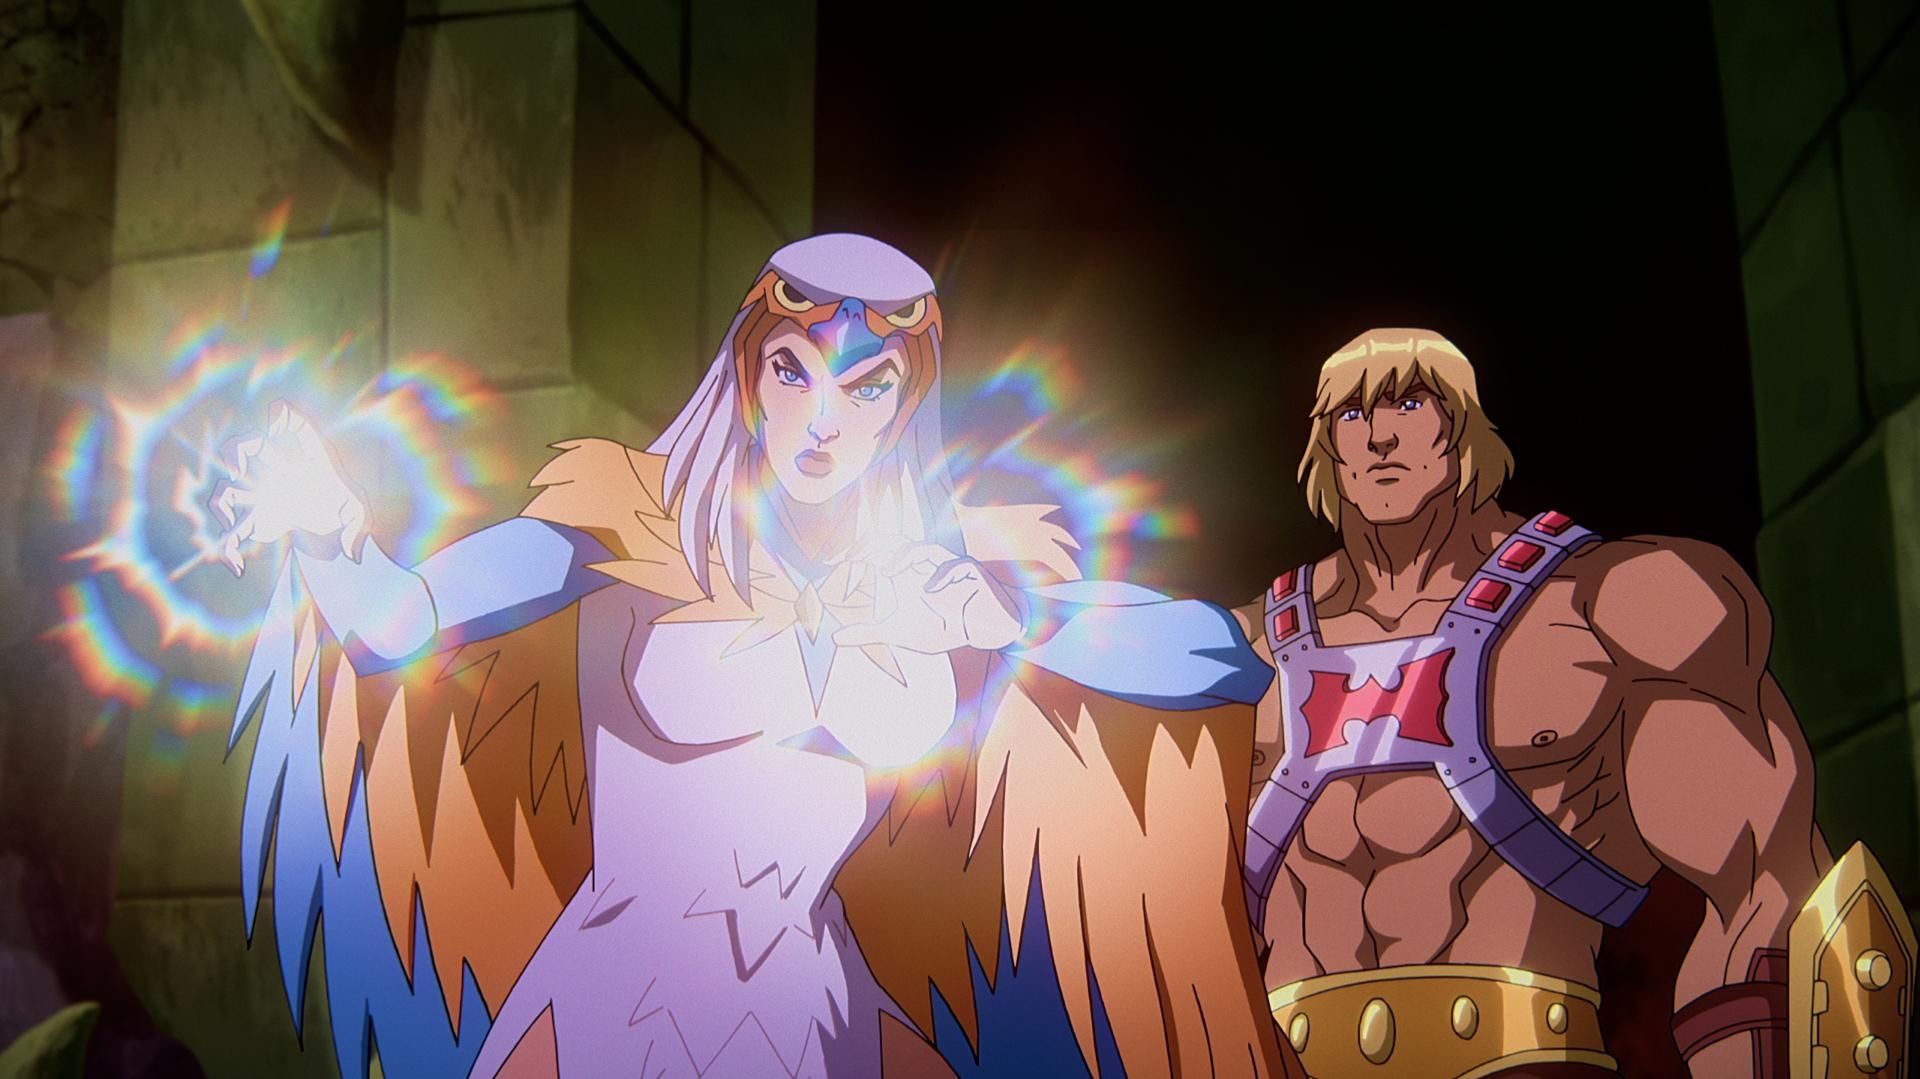 In a CG animated still from Masters of the Universe: Revelation, He-Man (right) stands behind Sorceress (left) in a stone room lit only by the light coming from SorceressesÕ hands. Sorceress has her palms outstretched in front of her and wears a white dress, a falcon-like hood over head and orange and blue wings. He-Man wears a silver chest plate with a red &quot;H&quot; in the center, a golden armored belt and wrist plates.